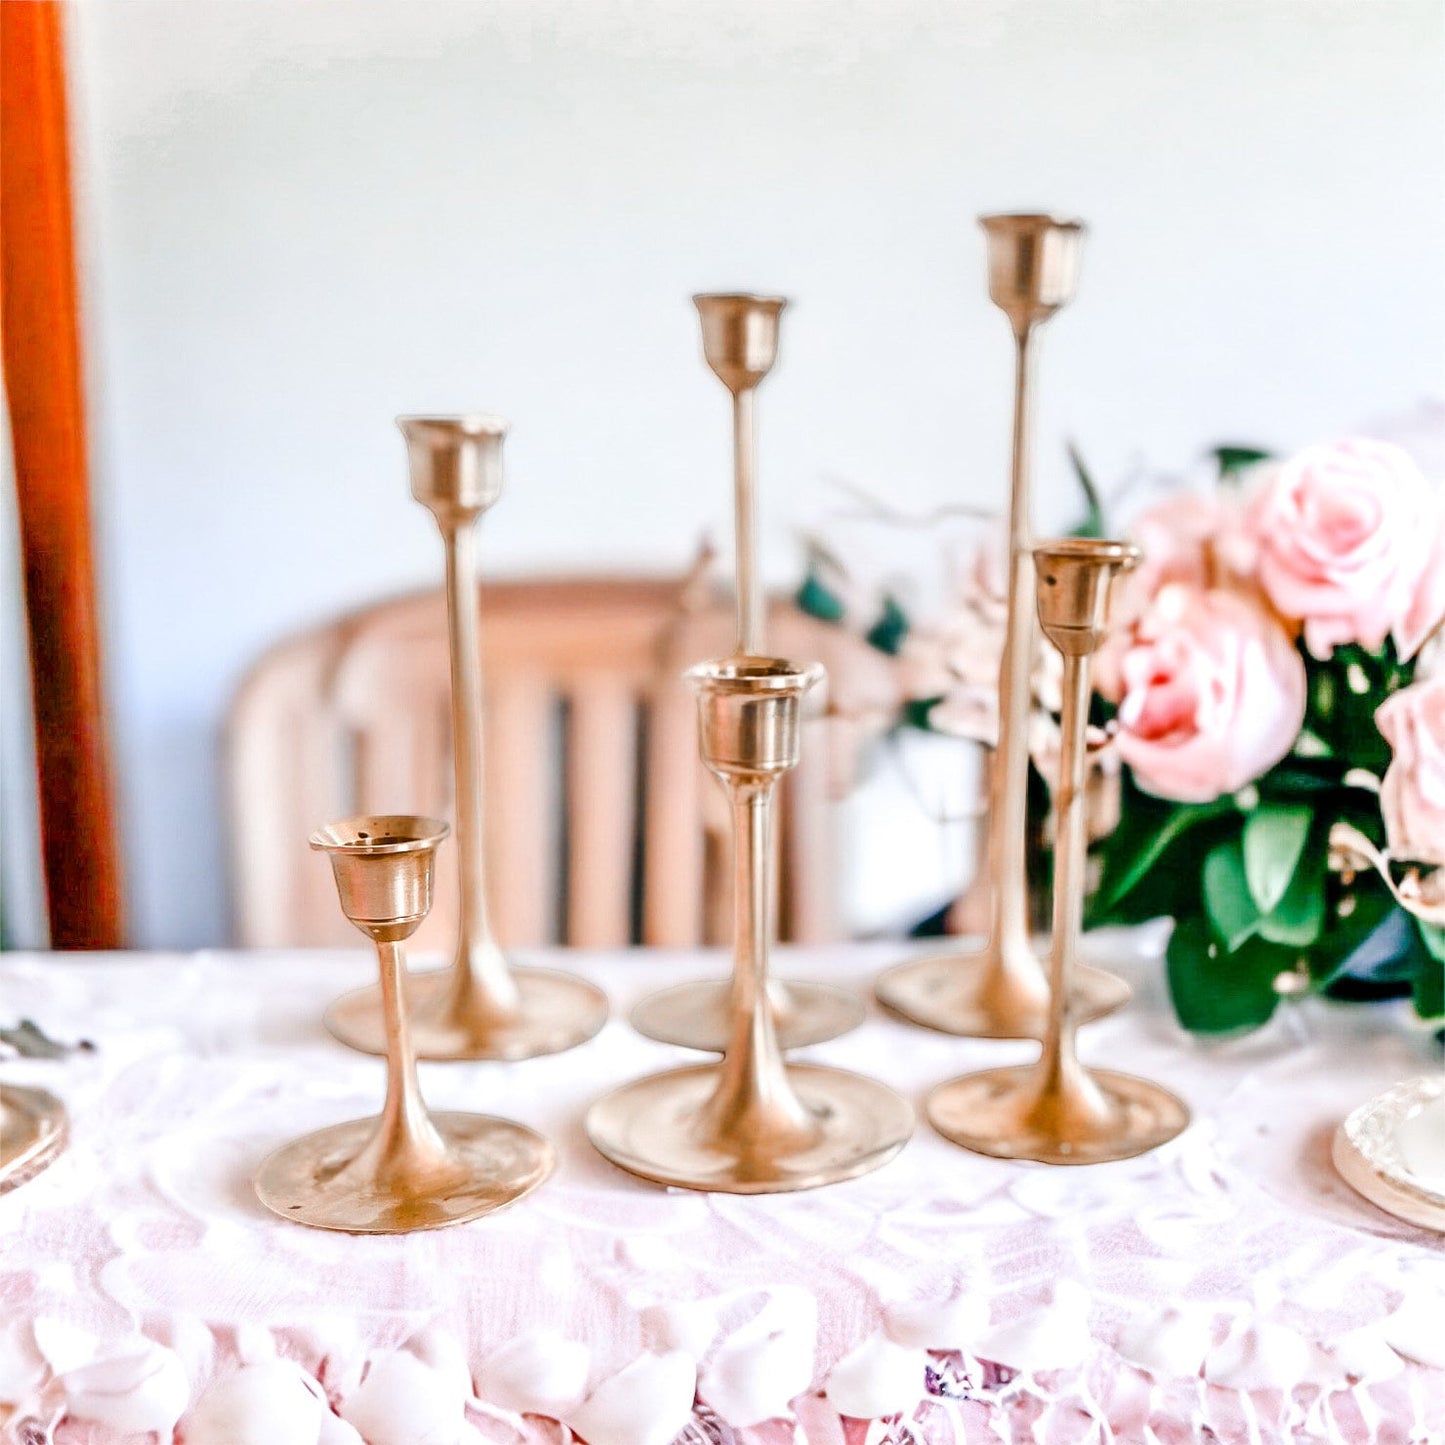 Vintage, Candle Holder, Brass Candlestick, Fall Table Decor